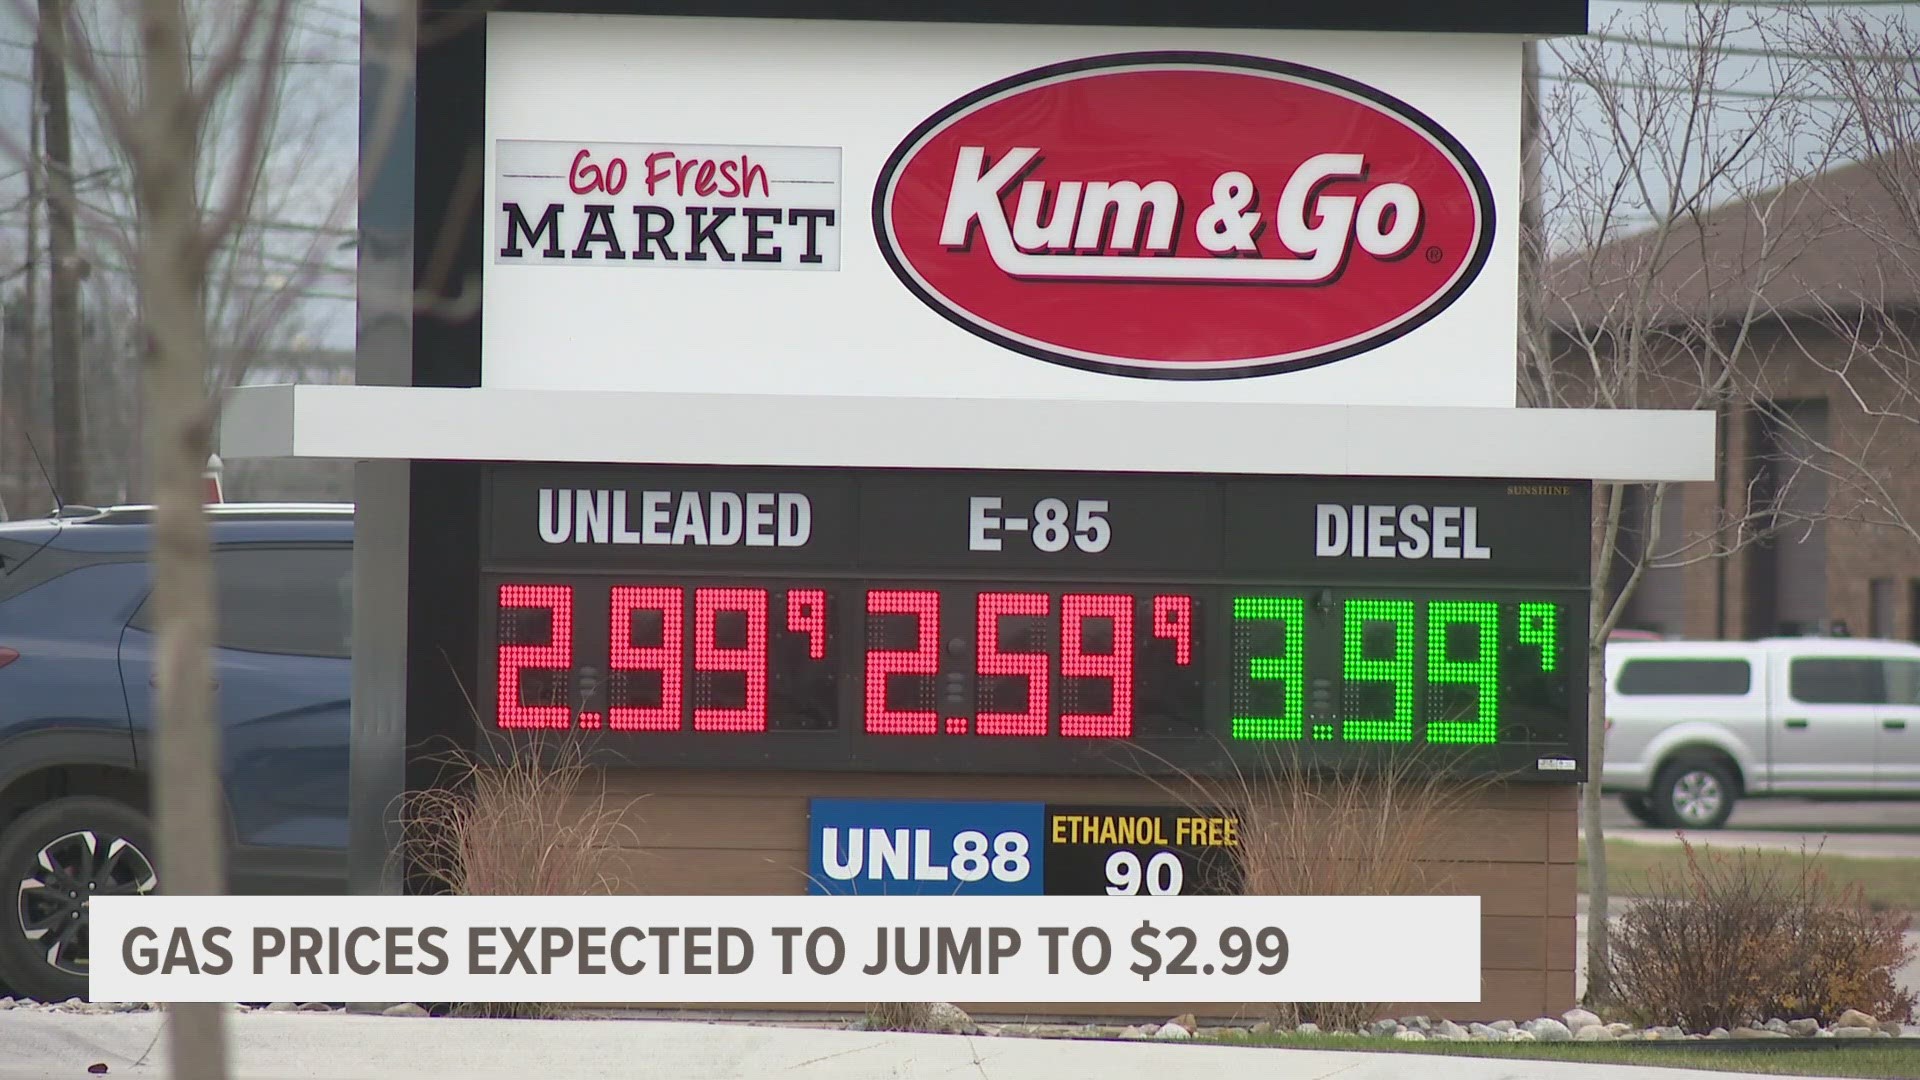 A Gassbuddy expert says he expects gas prices to drop again in January.